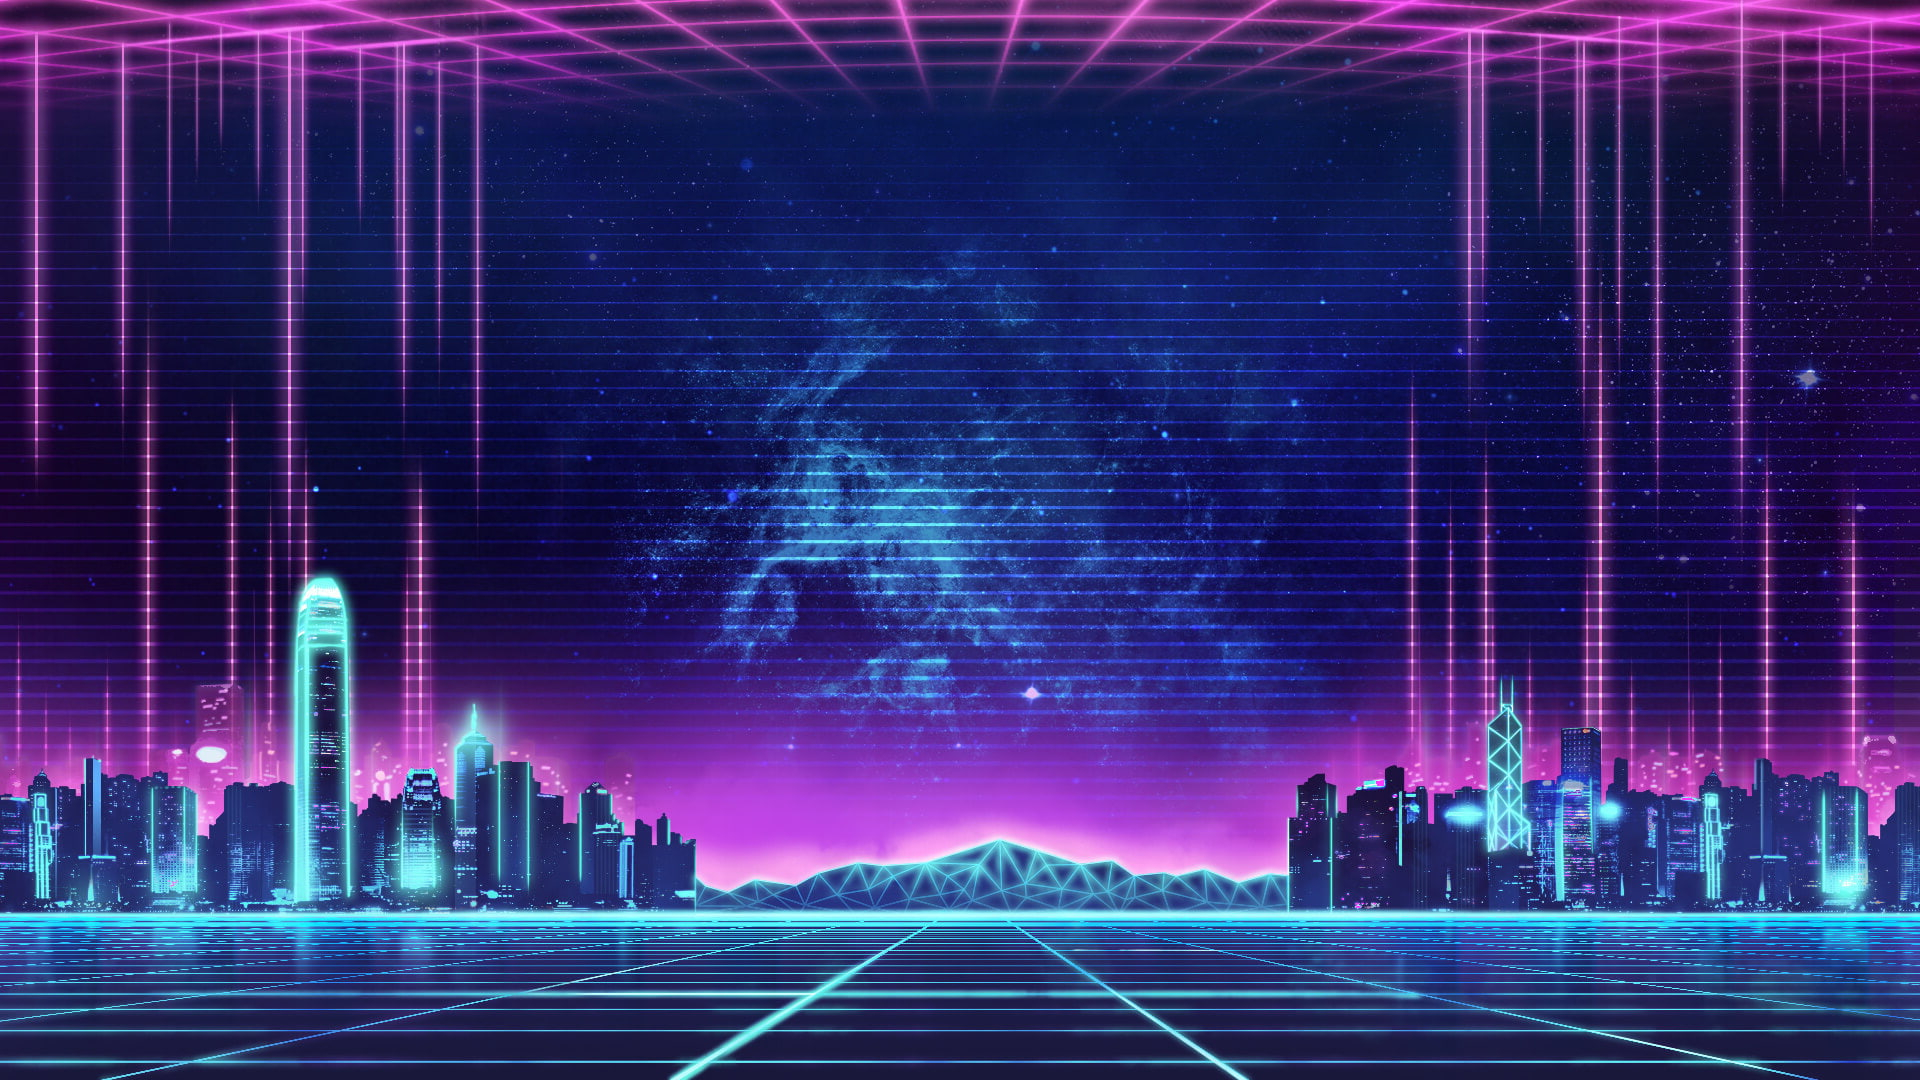 Wallpaper synthwave, music, retro, neon city, Others, architecture, built structure